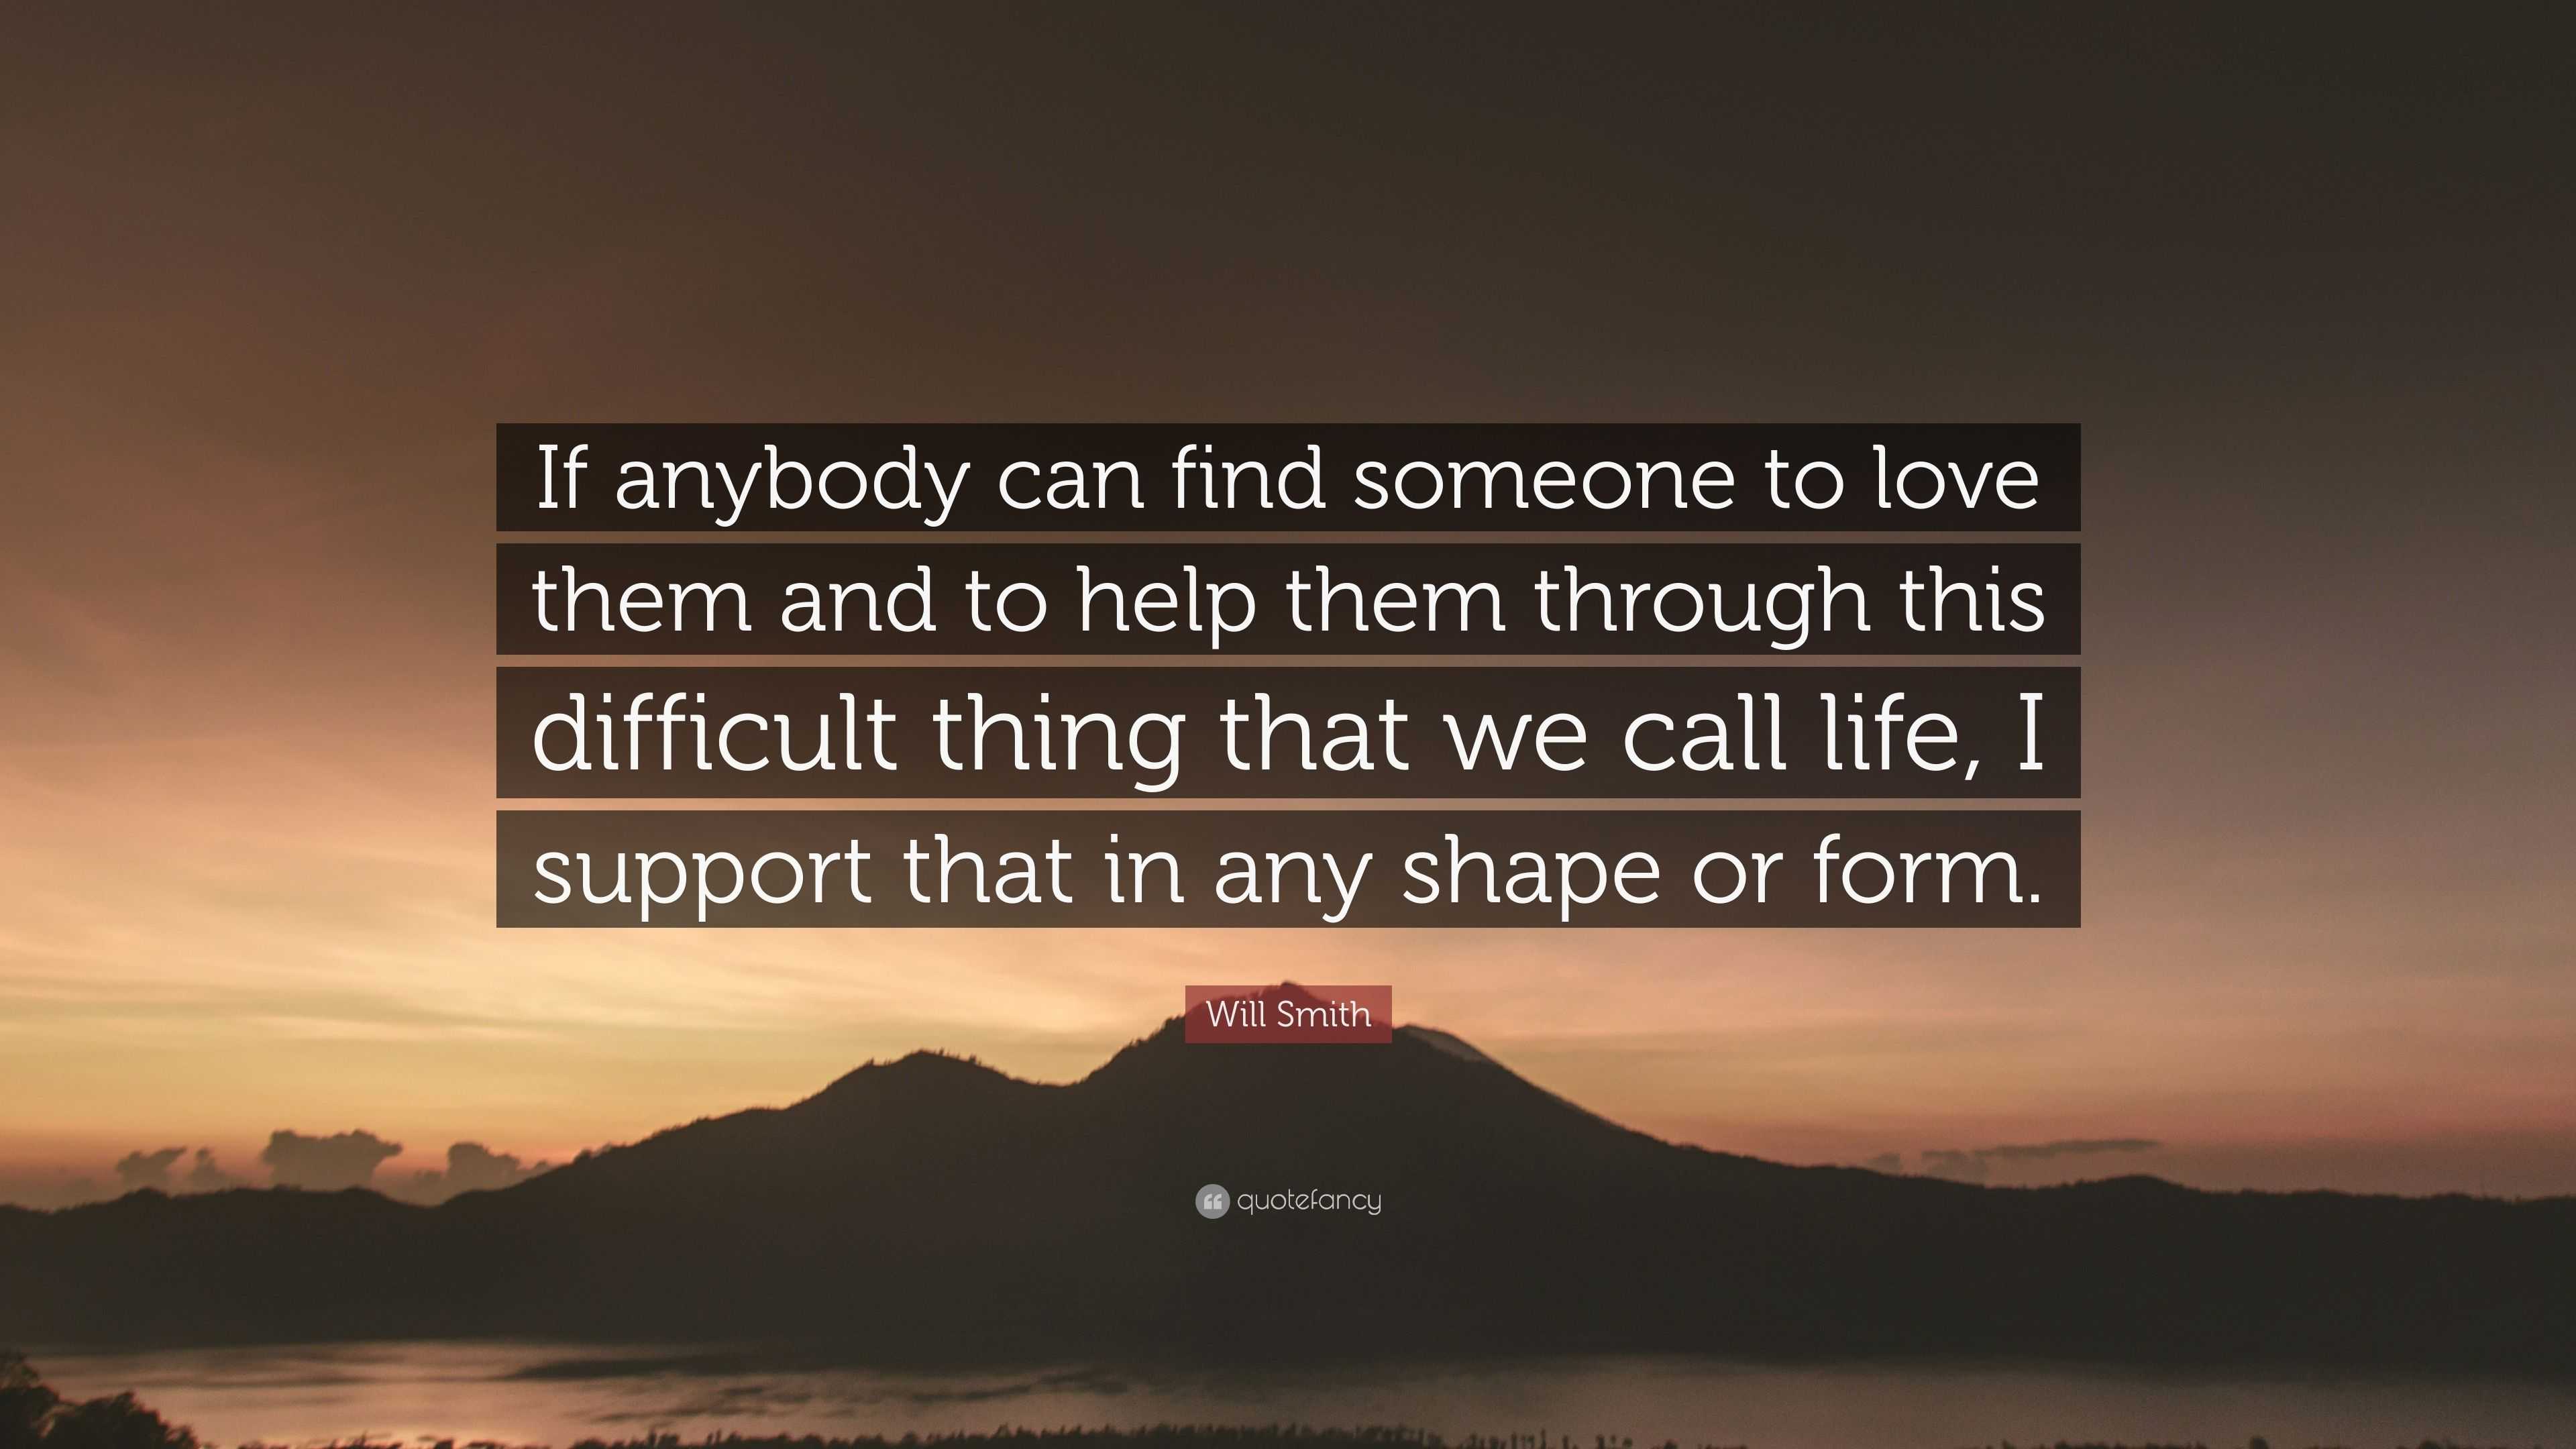 Will Smith Quote “If anybody can find someone to love them and to help